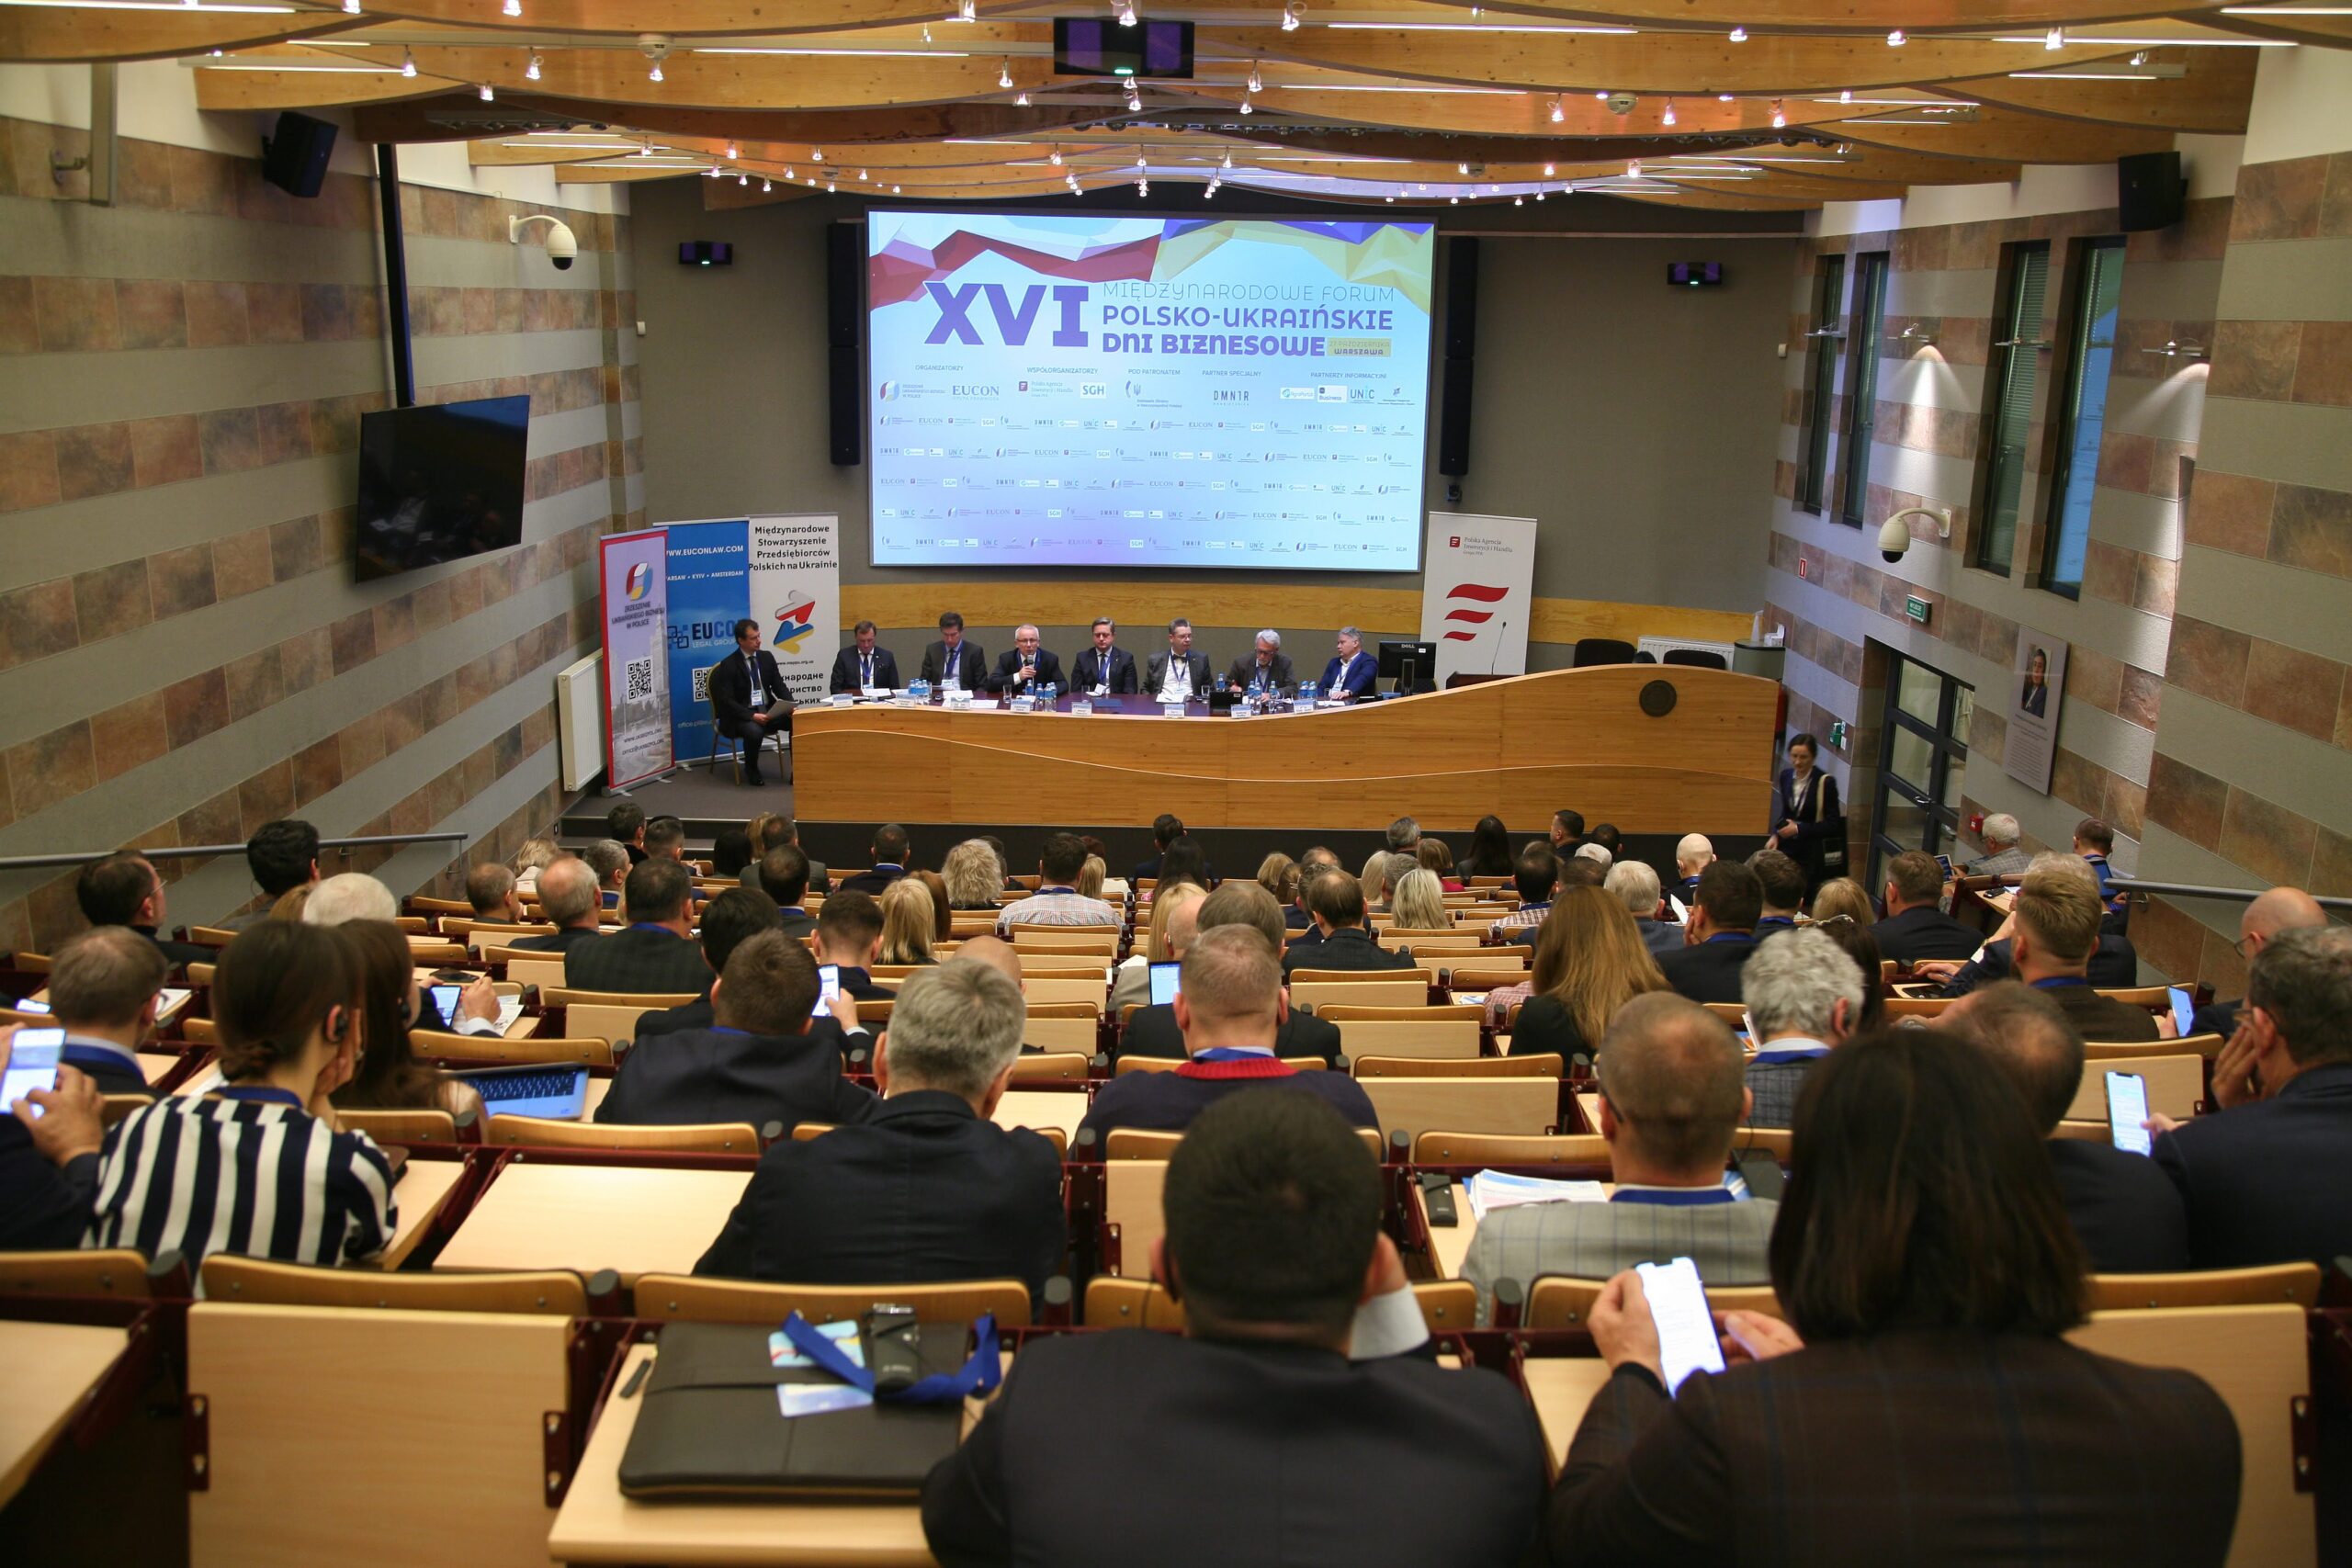 Synergy in the name of victory, reconstruction and the future: the XVI International Forum “Polish-Ukrainian Business Days” took place in Warsaw